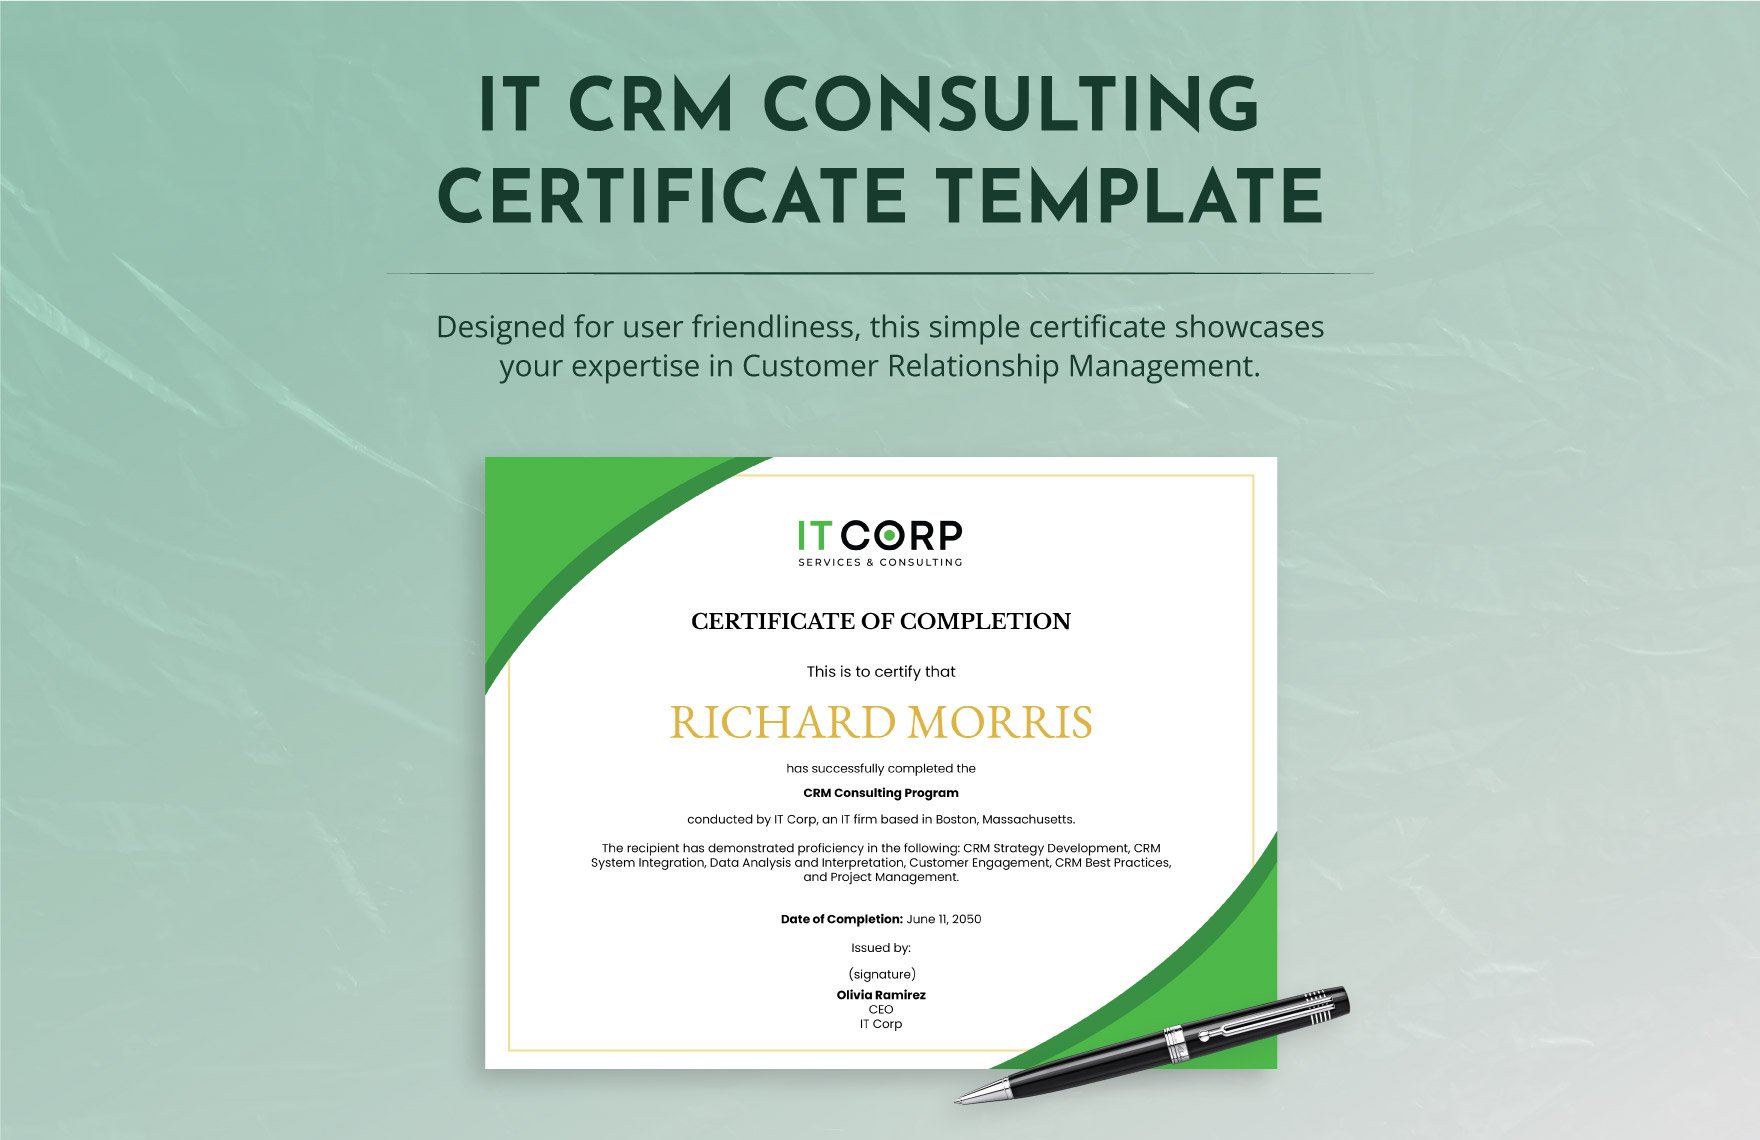 IT CRM Consulting Certificate Template in Word, Illustrator, PSD